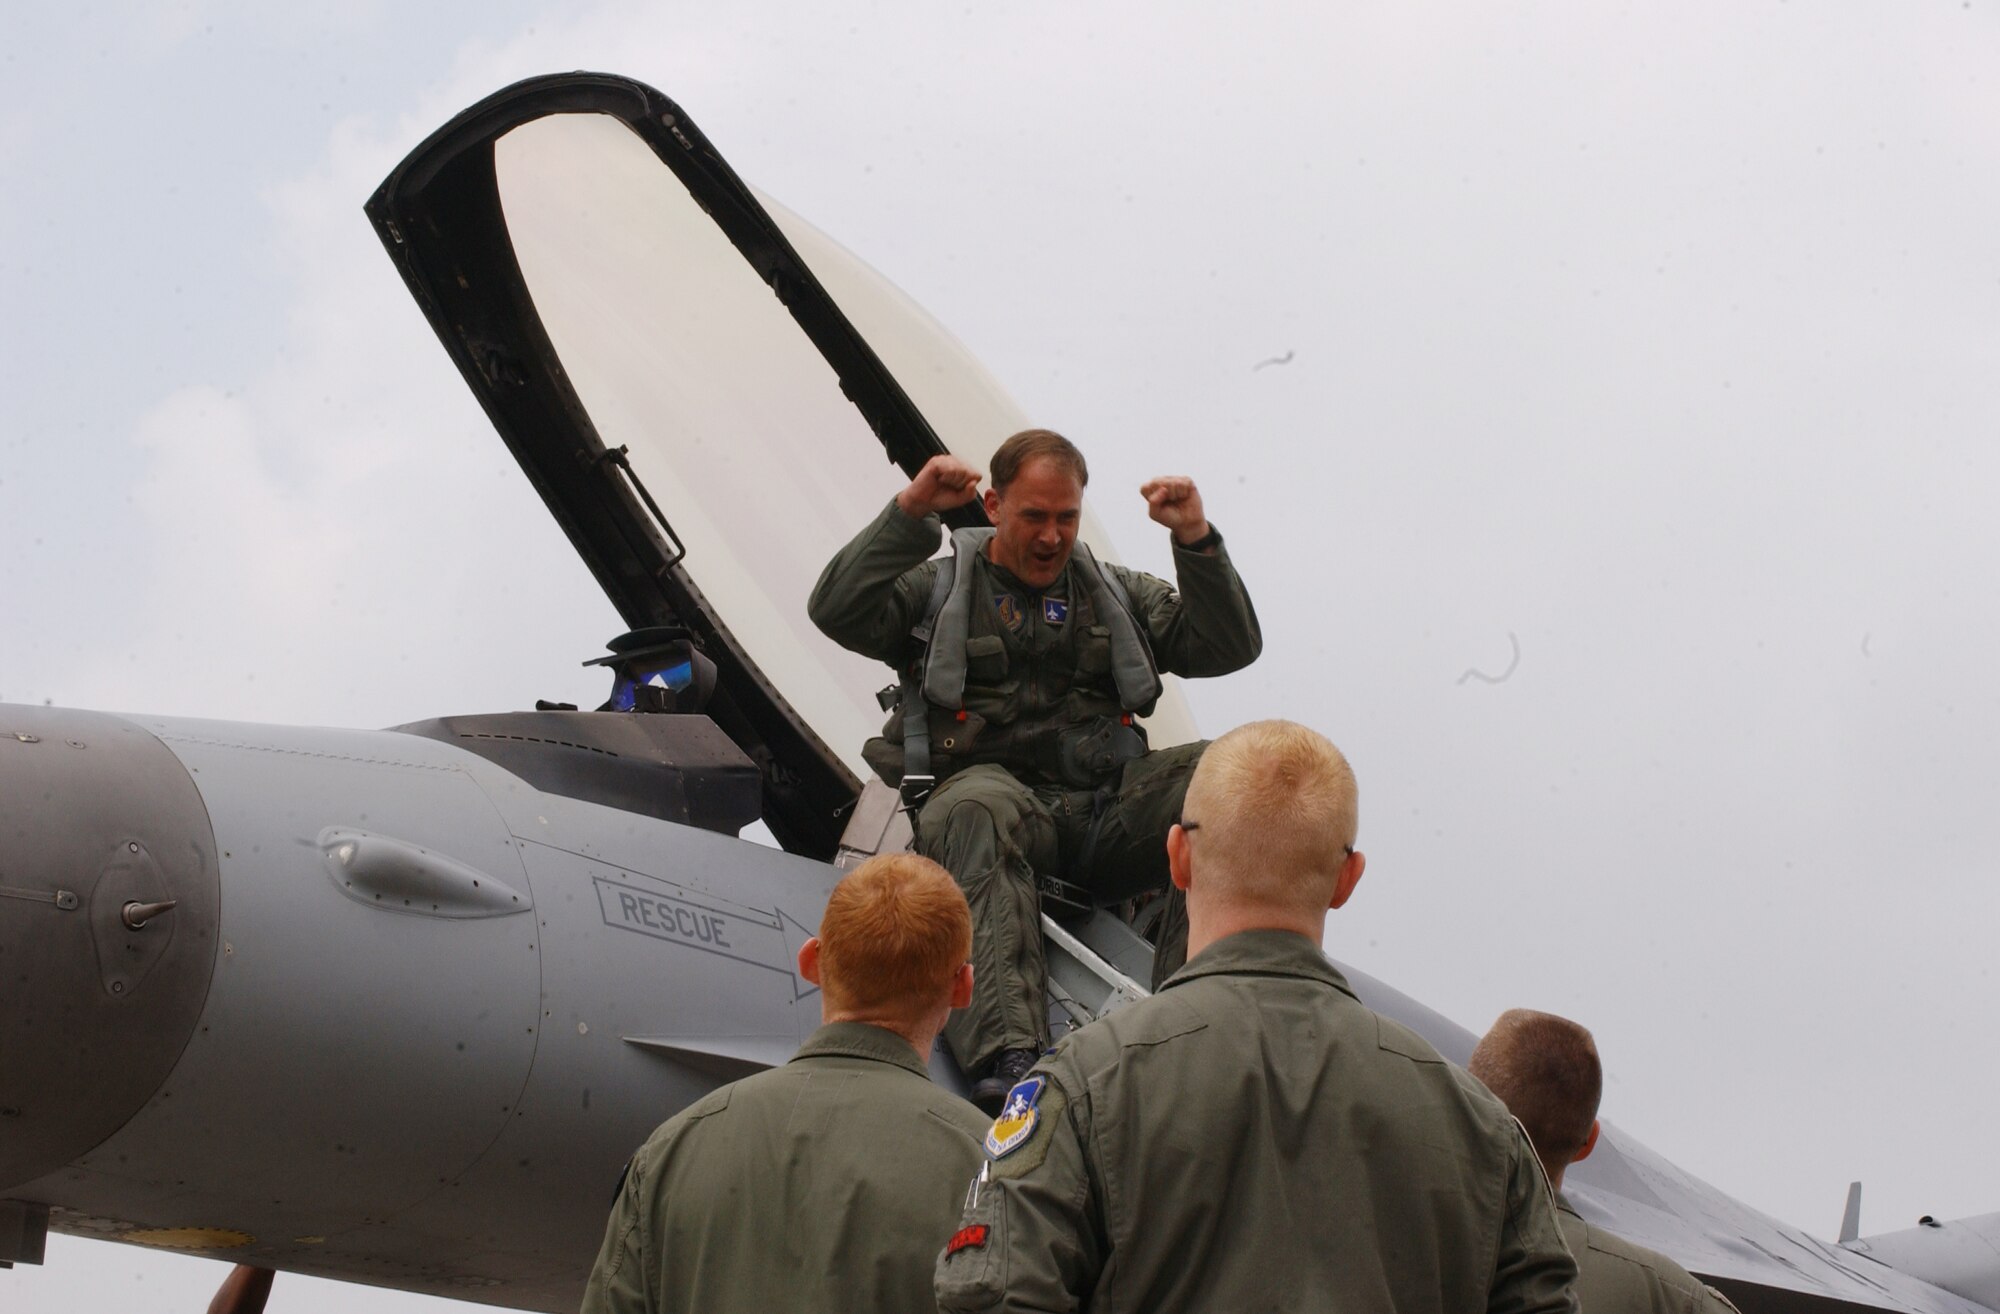 OSAN AIR BASE, Republic of Korea -- Lt. Col. Mark DeLong, 51st Operations Group deputy commander, celebrates reaching the 3,000th hour mark in the F-16 Fighting Falcon today. He was greeted by wing leadership upon his return to Osan. (U.S. Air Force photo by Airman Jason Epley)